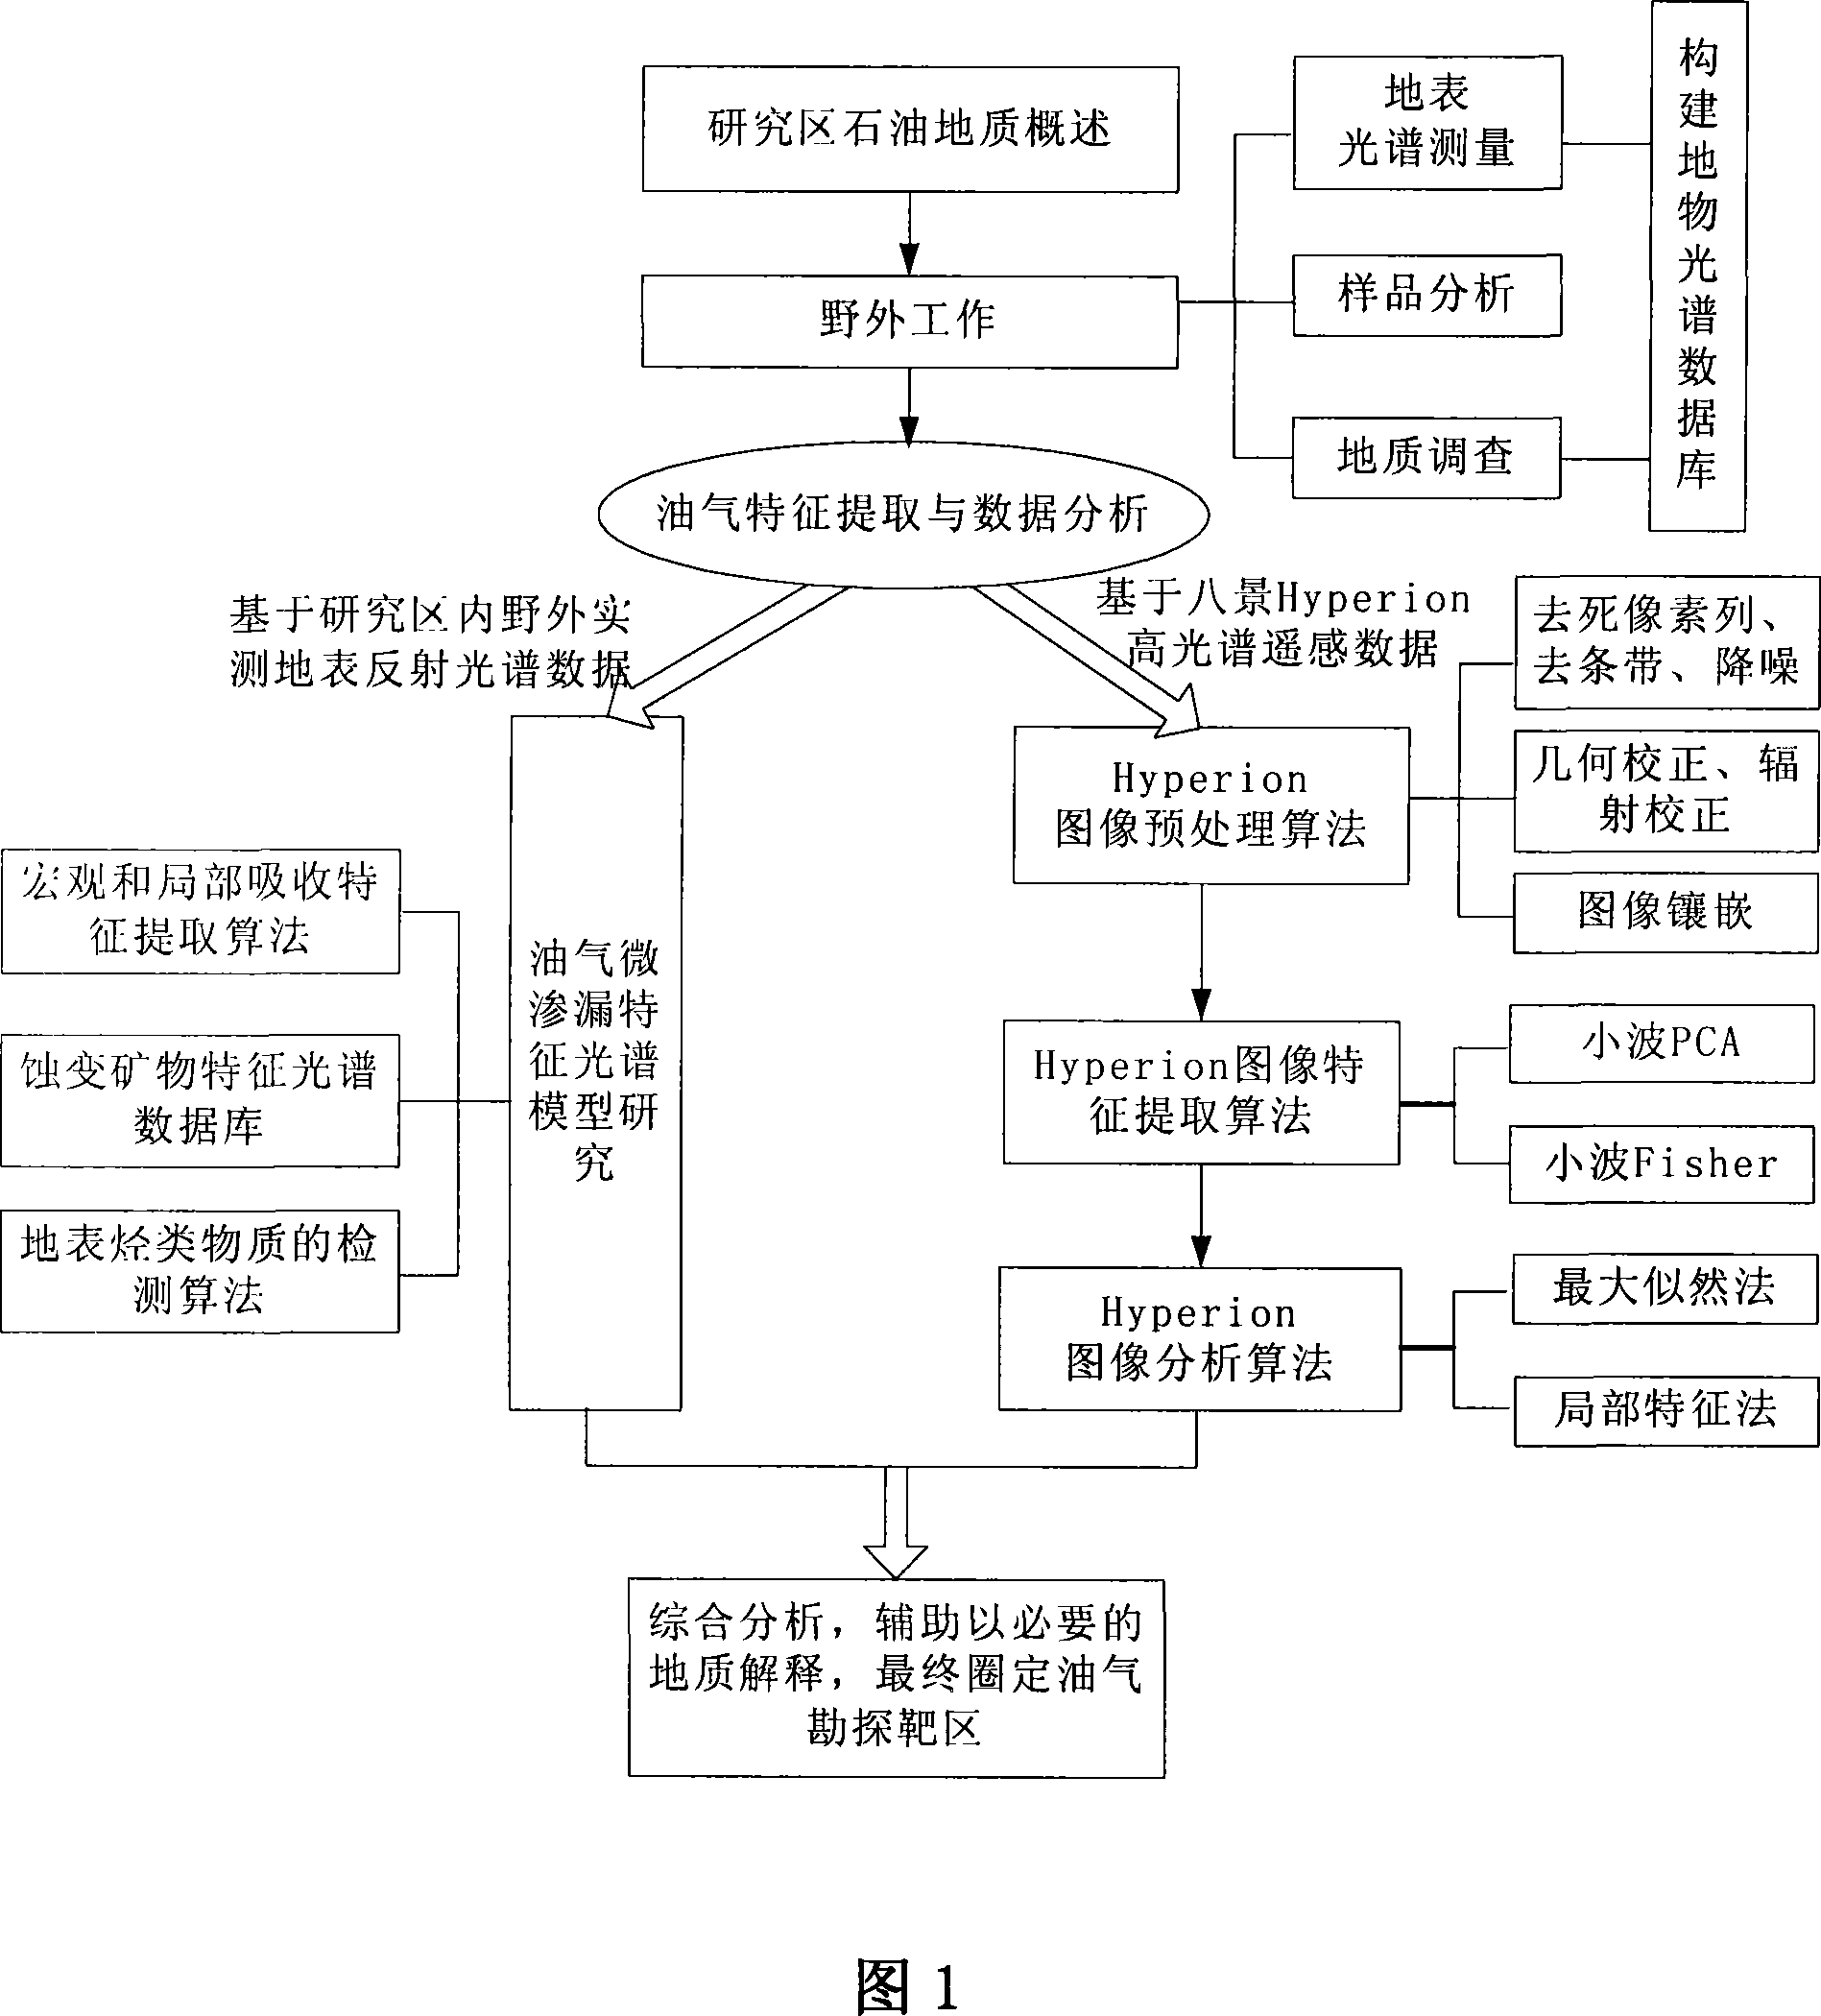 Exploration method and system for oil and gas